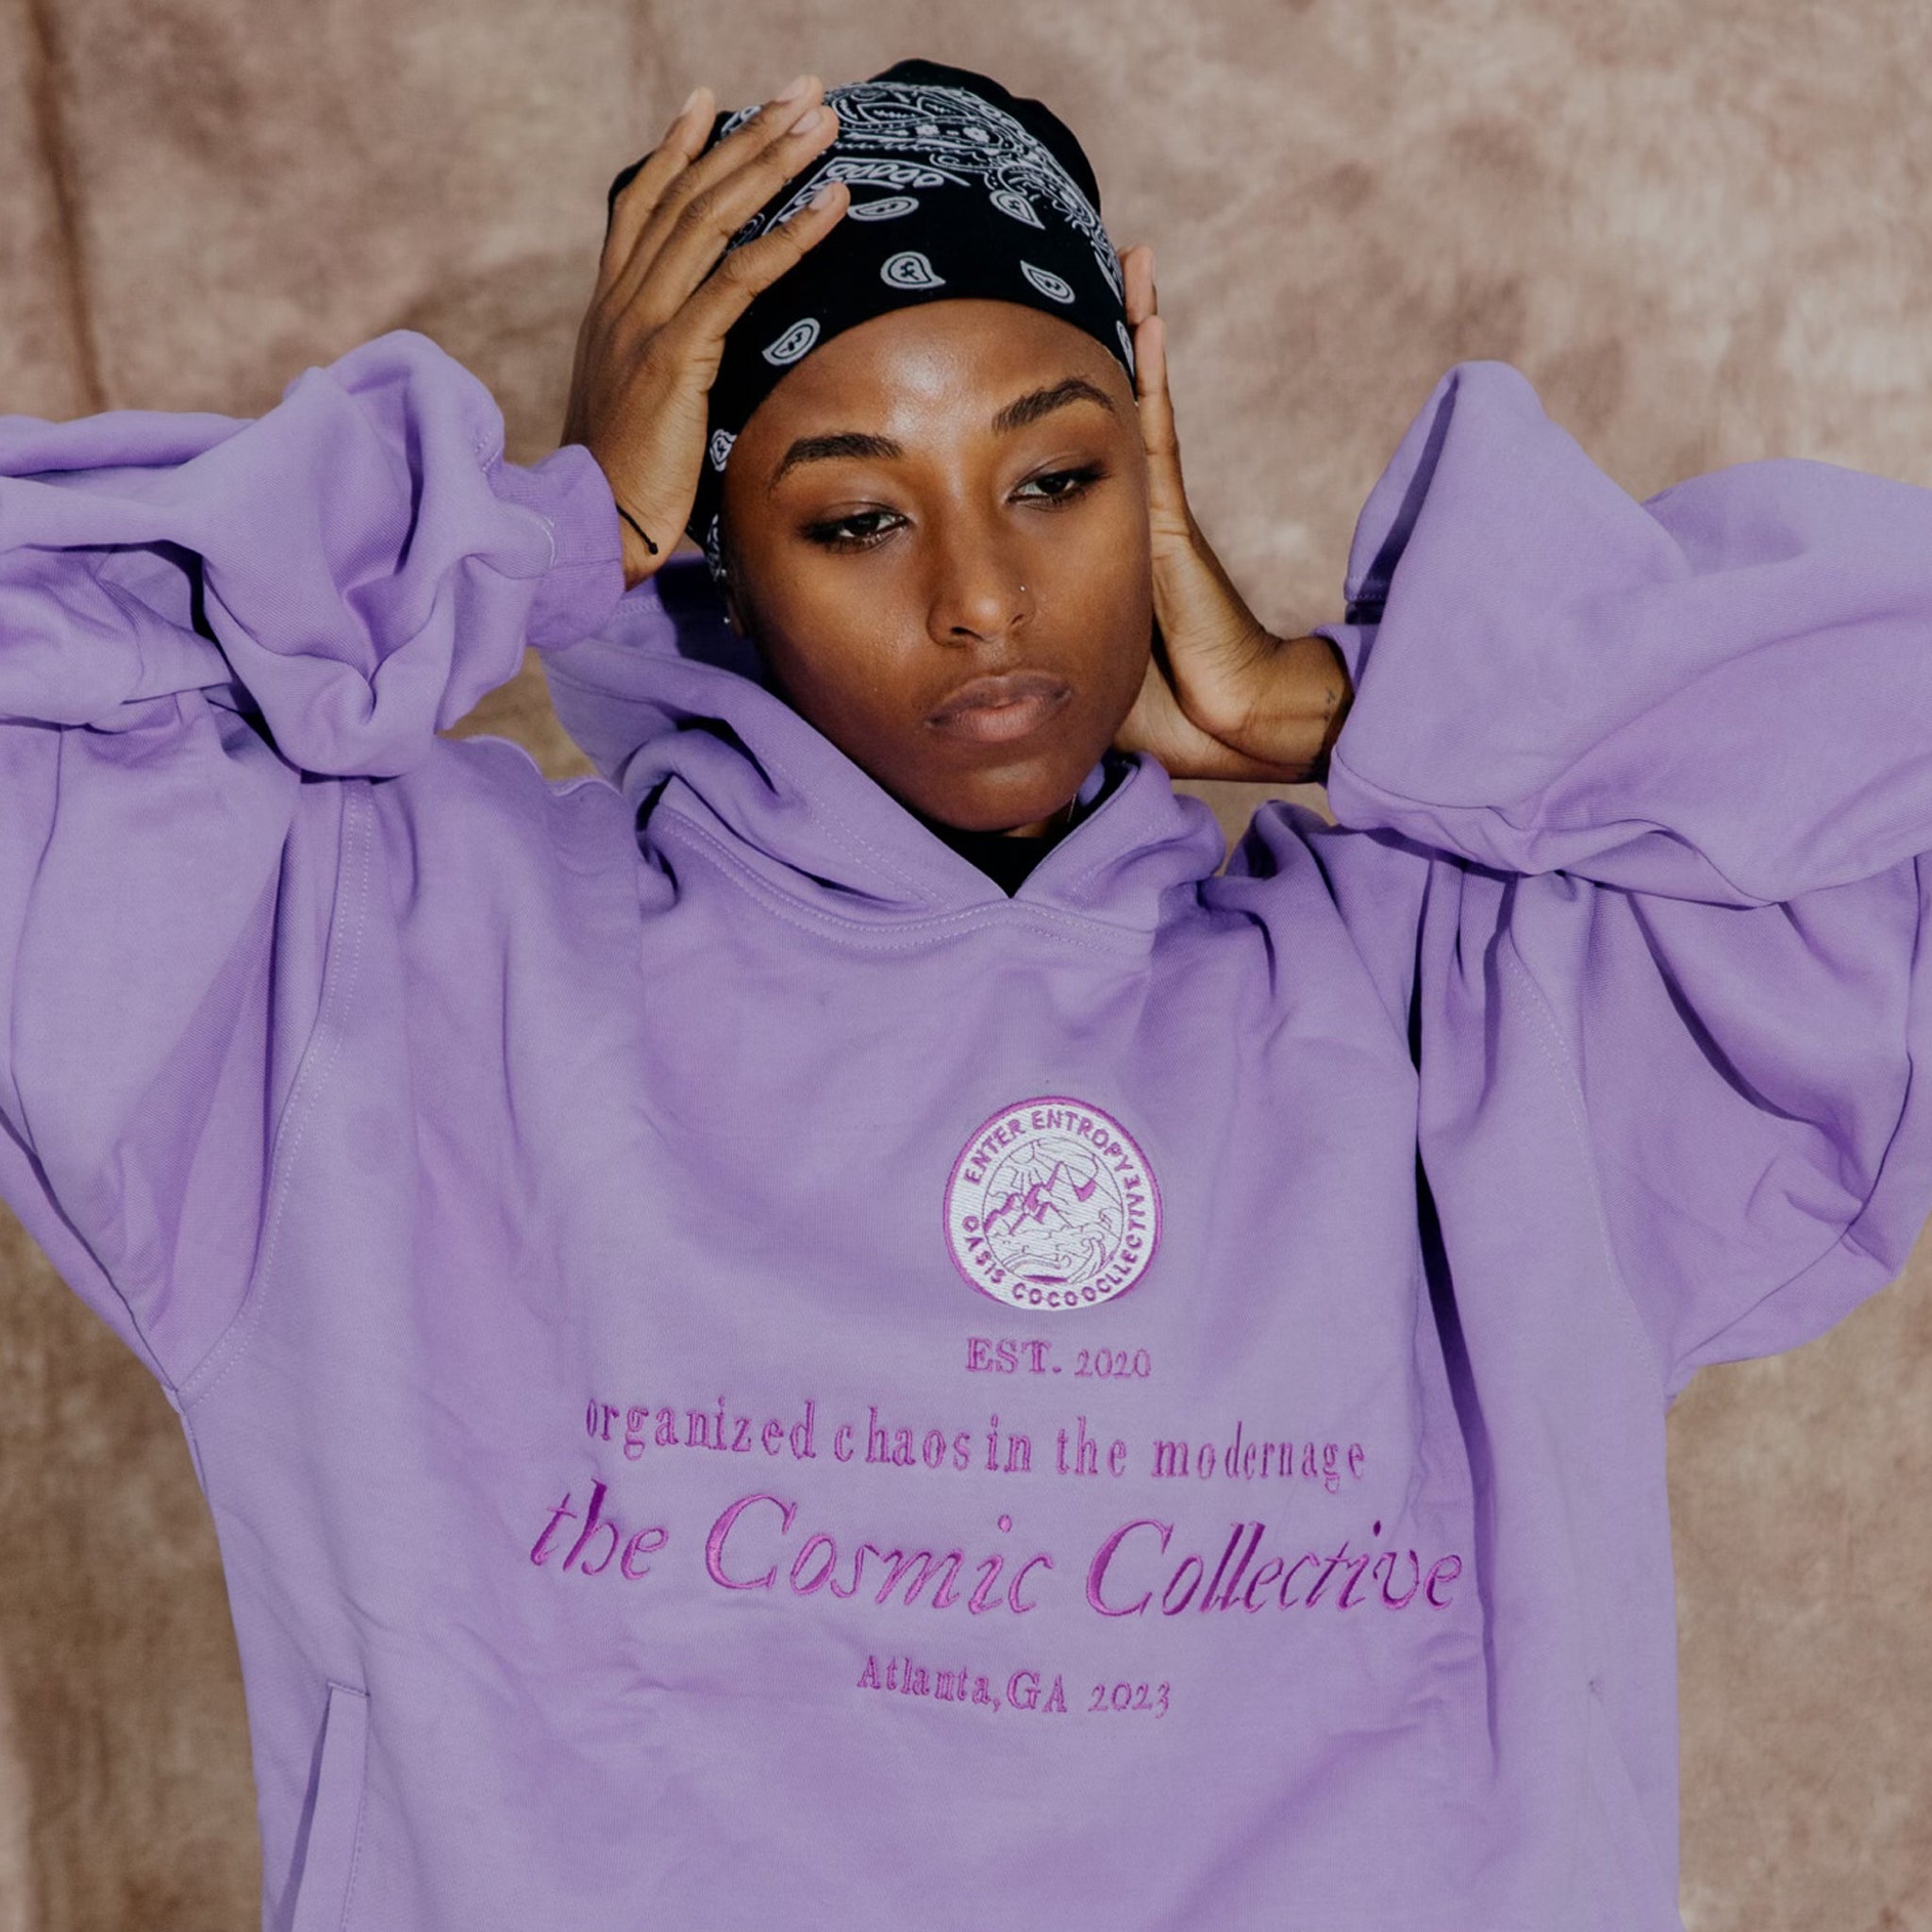 The Ube Collection features a 100% cotton purple hoodie with "Organized Chaos In the Modern Age" embroidery and slant front pockets.  Forms a sweatsuit set with the Paris Heavyweight Sweatpants (sold separately).